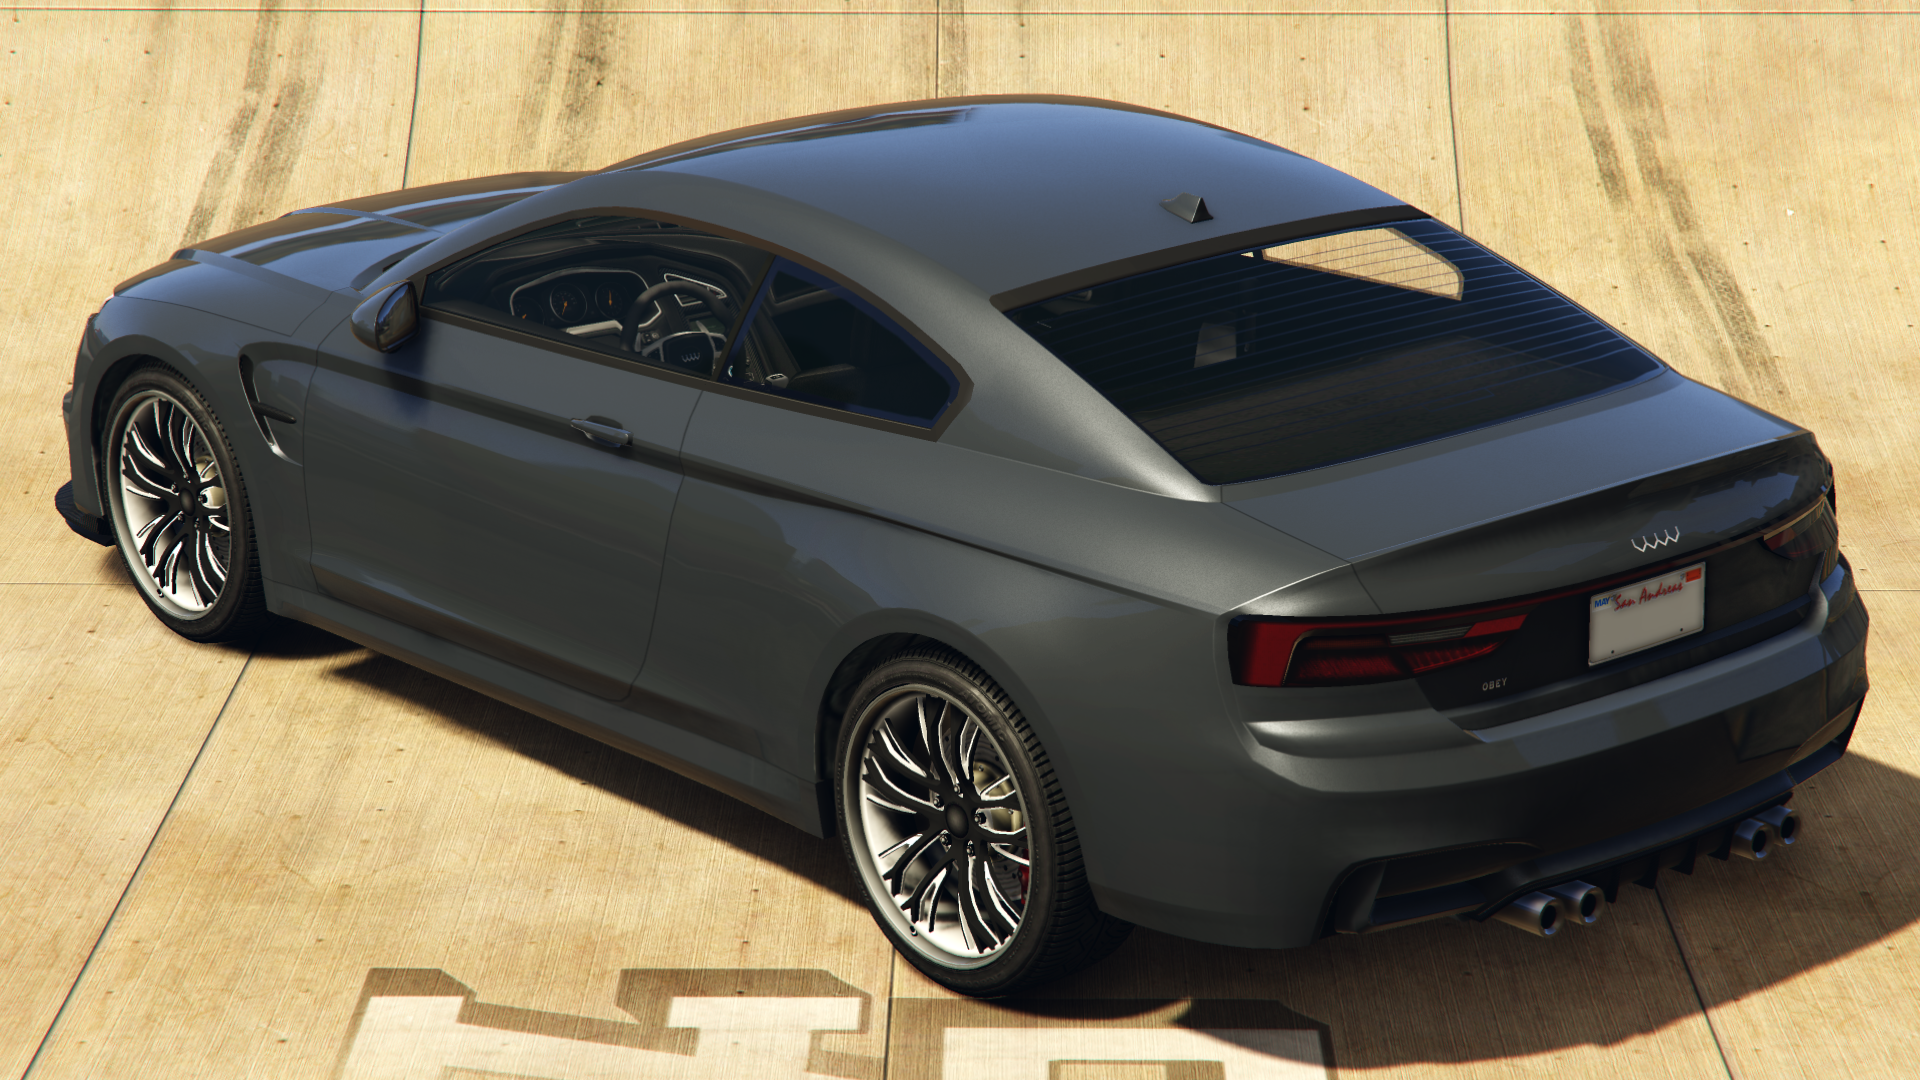 Obey 8F Drafter Appreciation & Discussion Thread - Vehicles - GTAForums